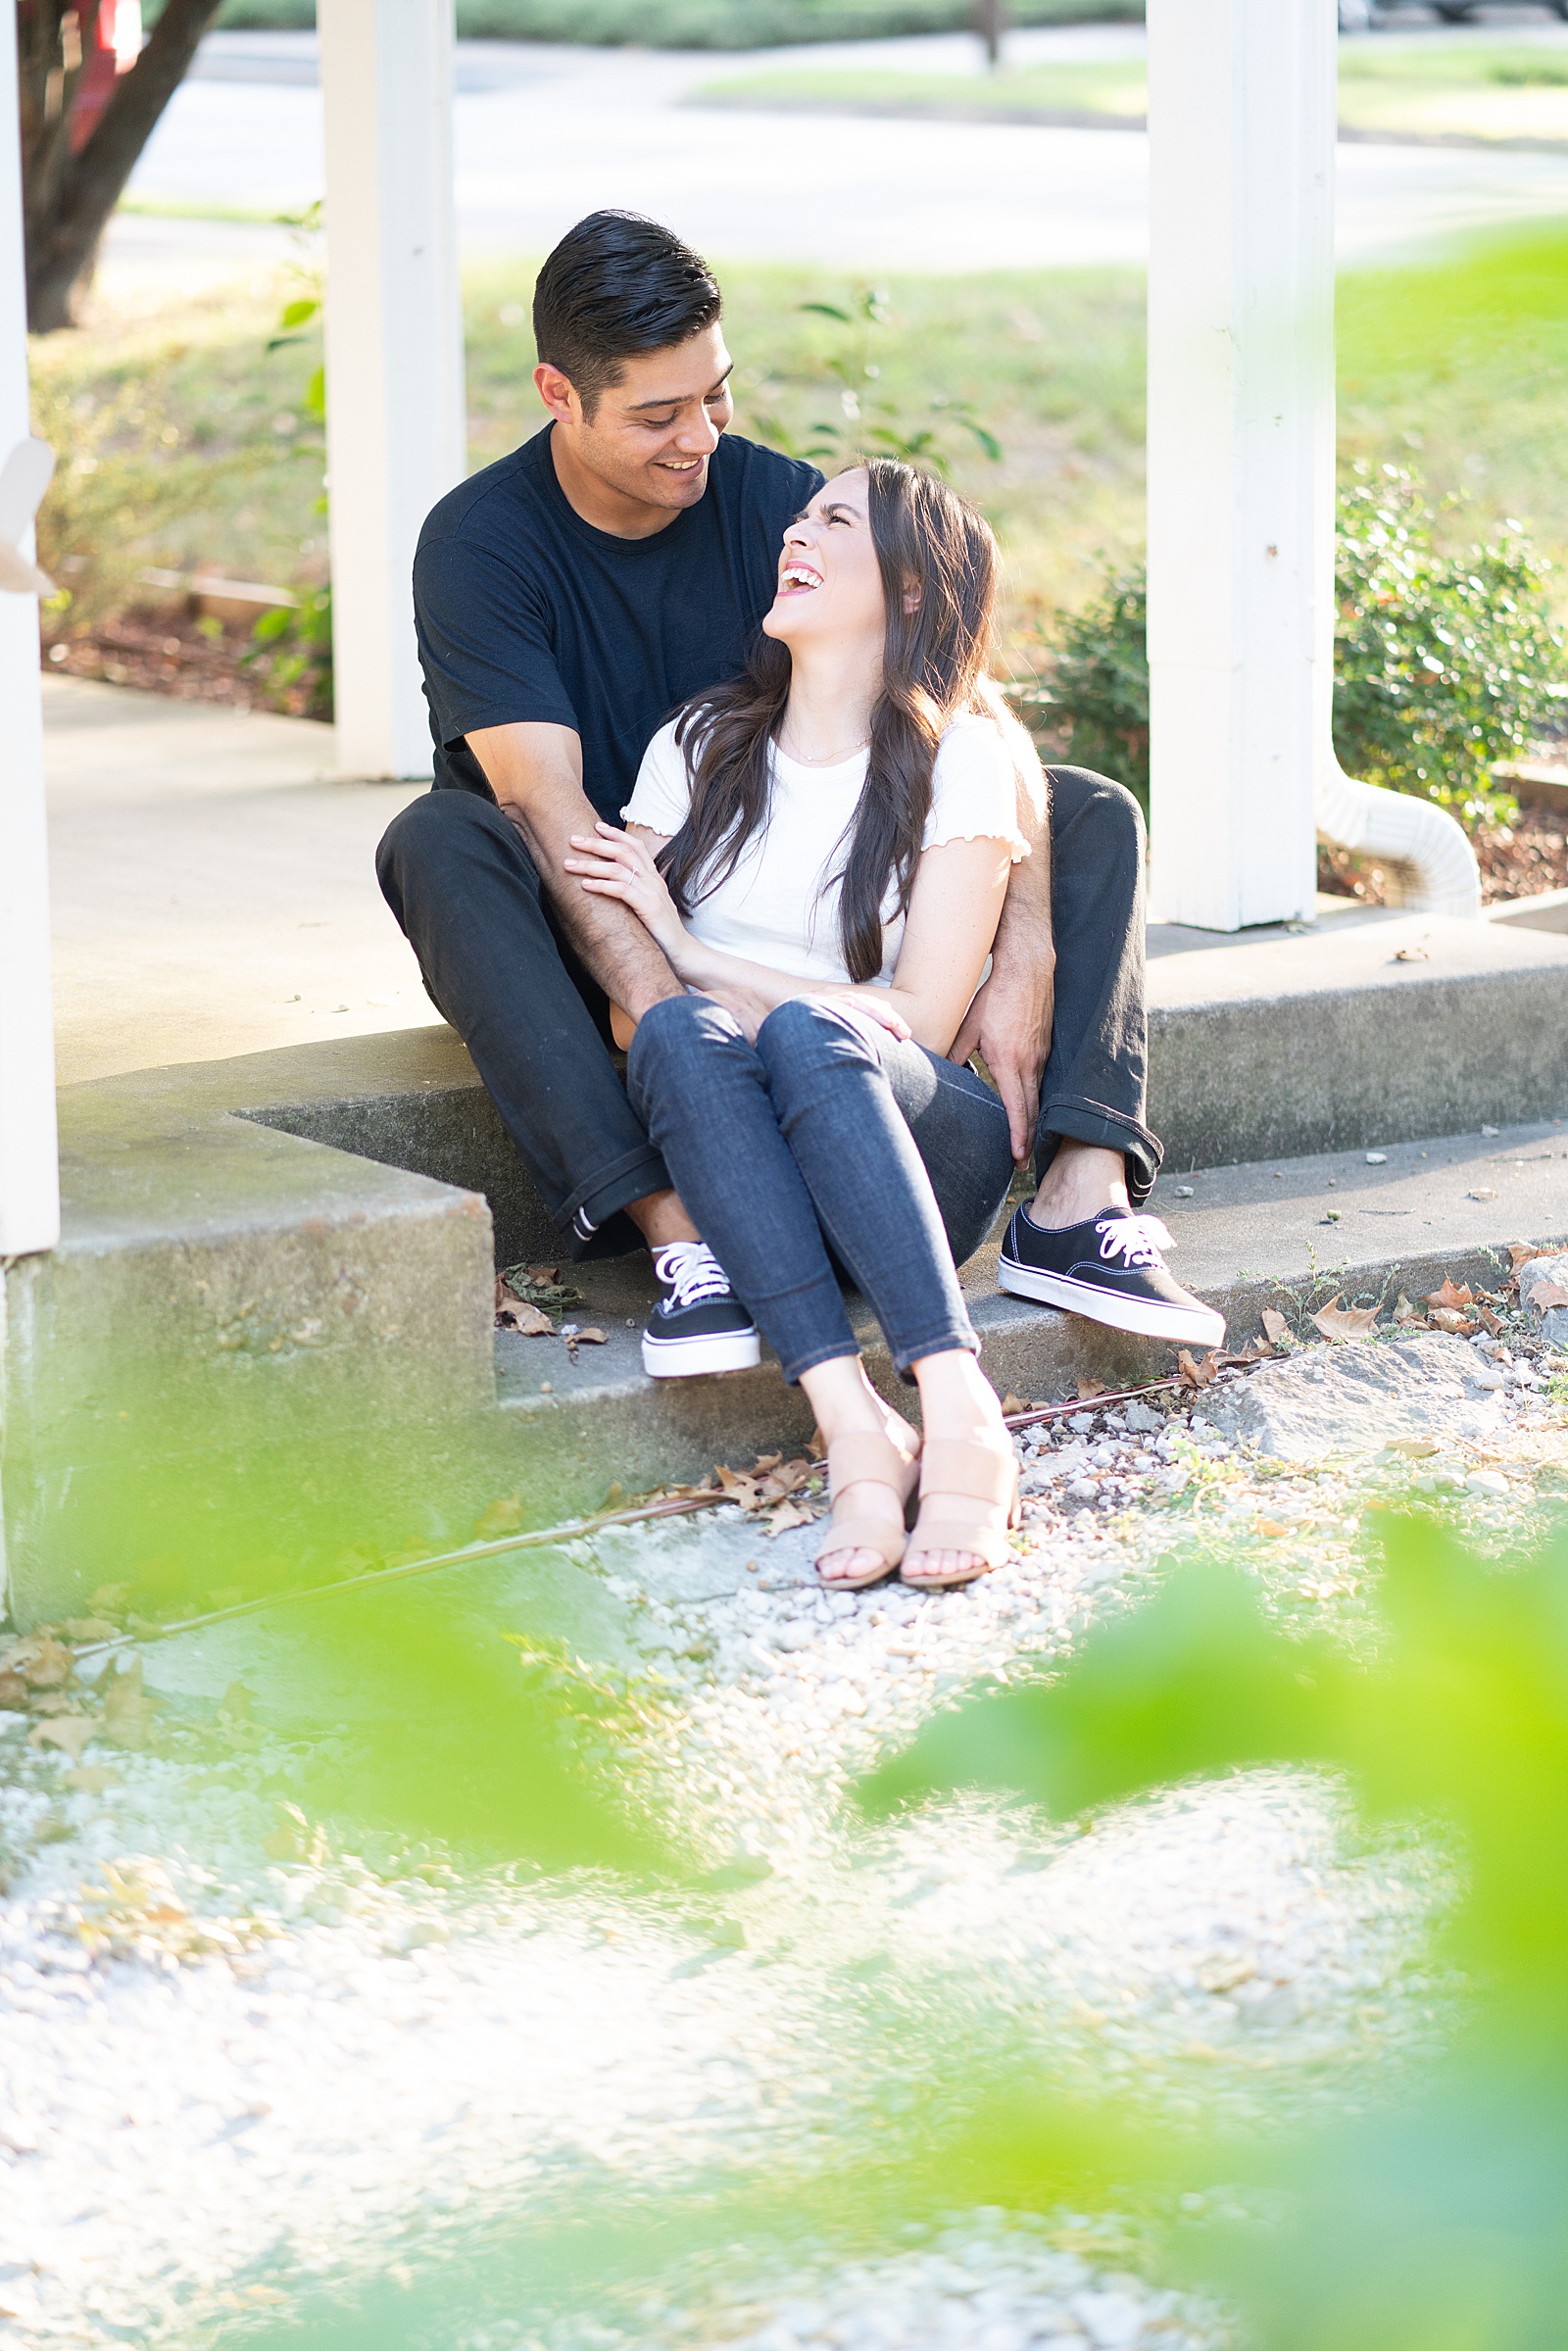 in-home engagement photos